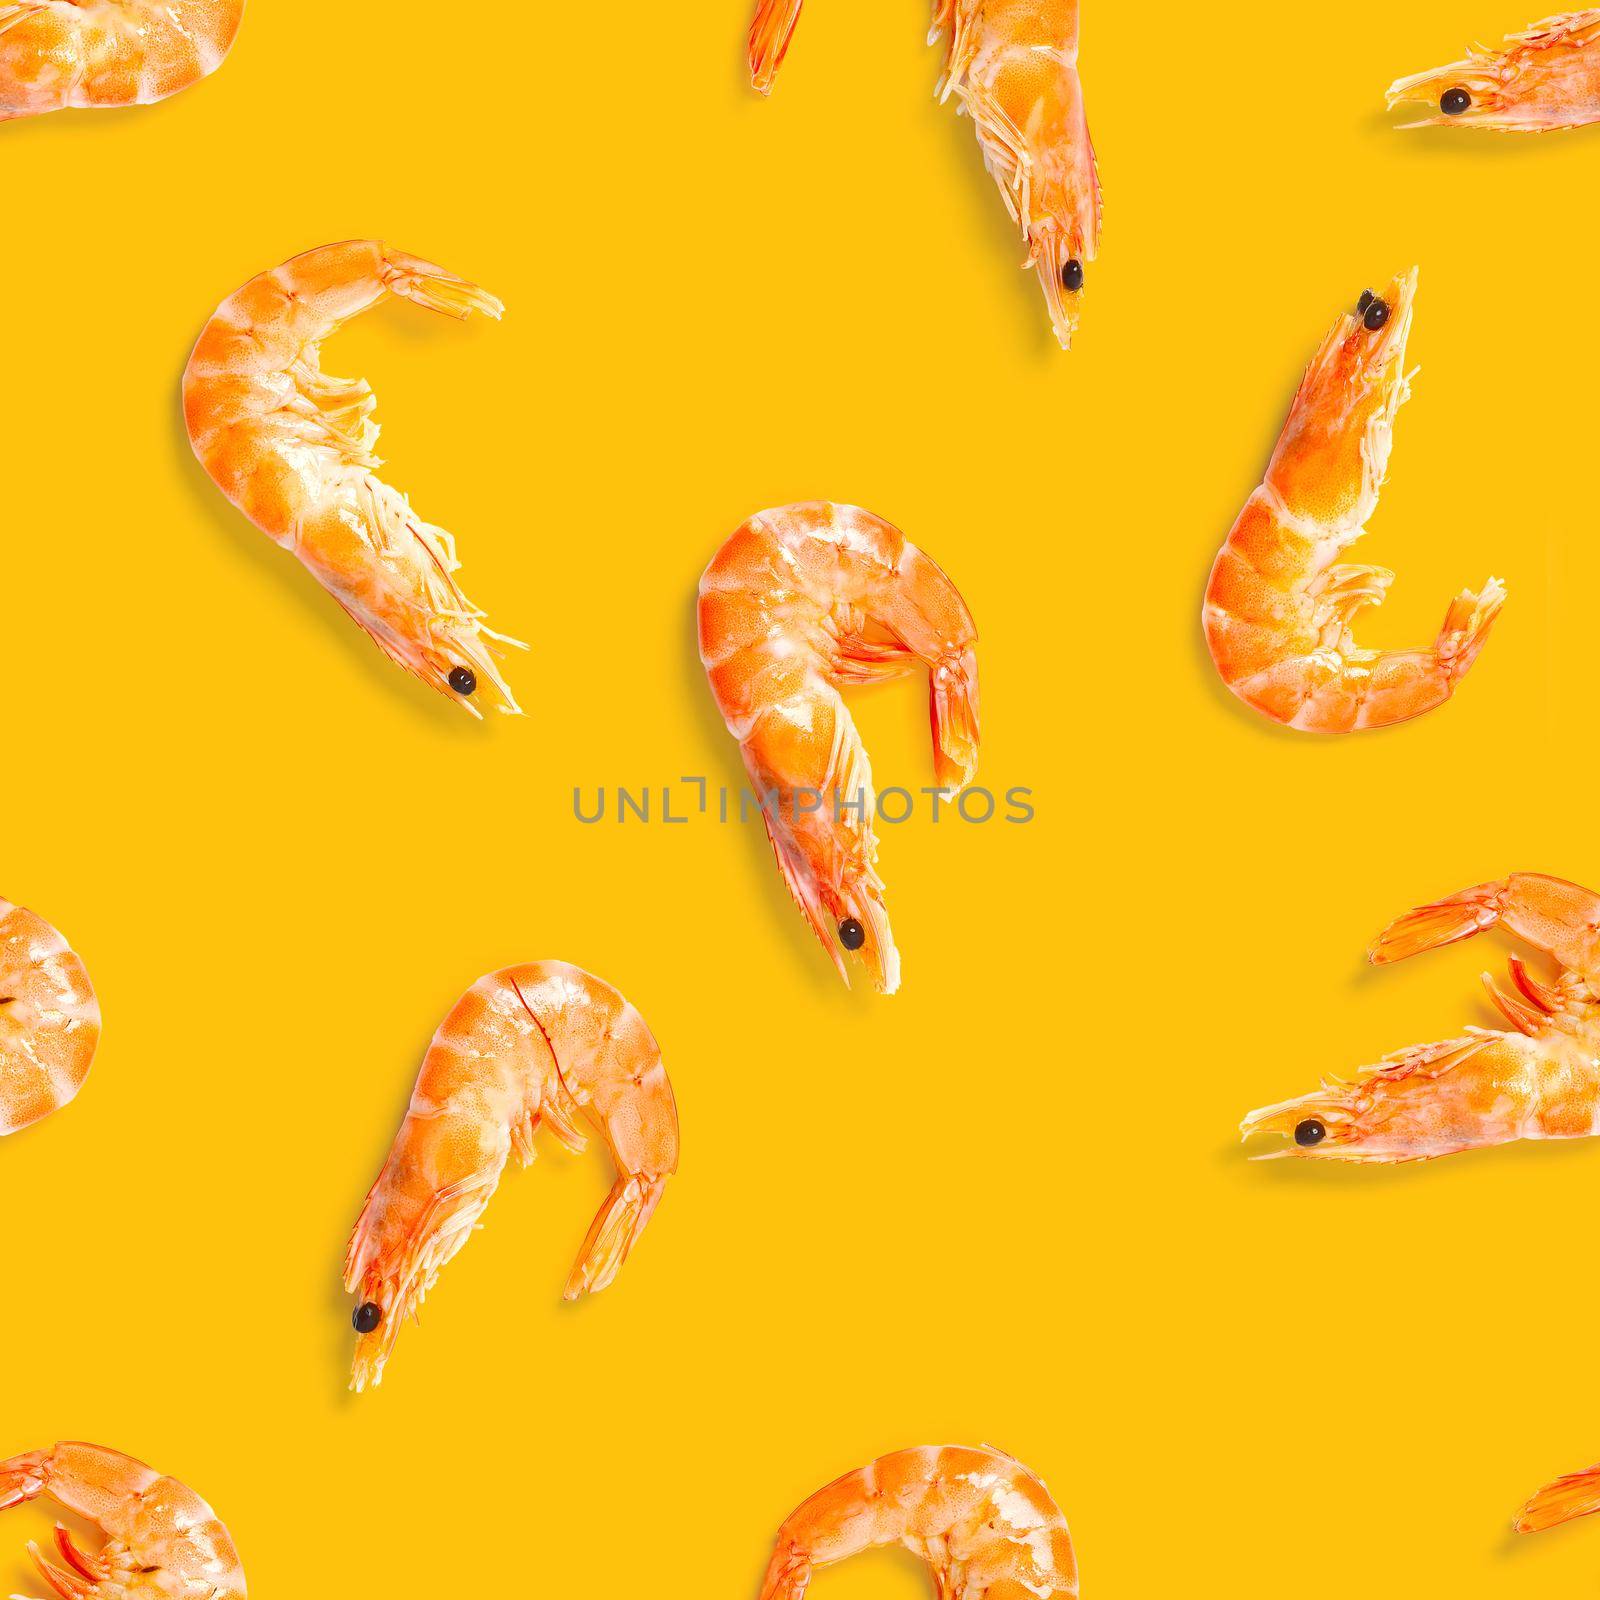 Seamless pattern made from Prawn isolated on a orange background. Tiger shrimp. Seafood seamless pattern with shrimps. seafood pattern